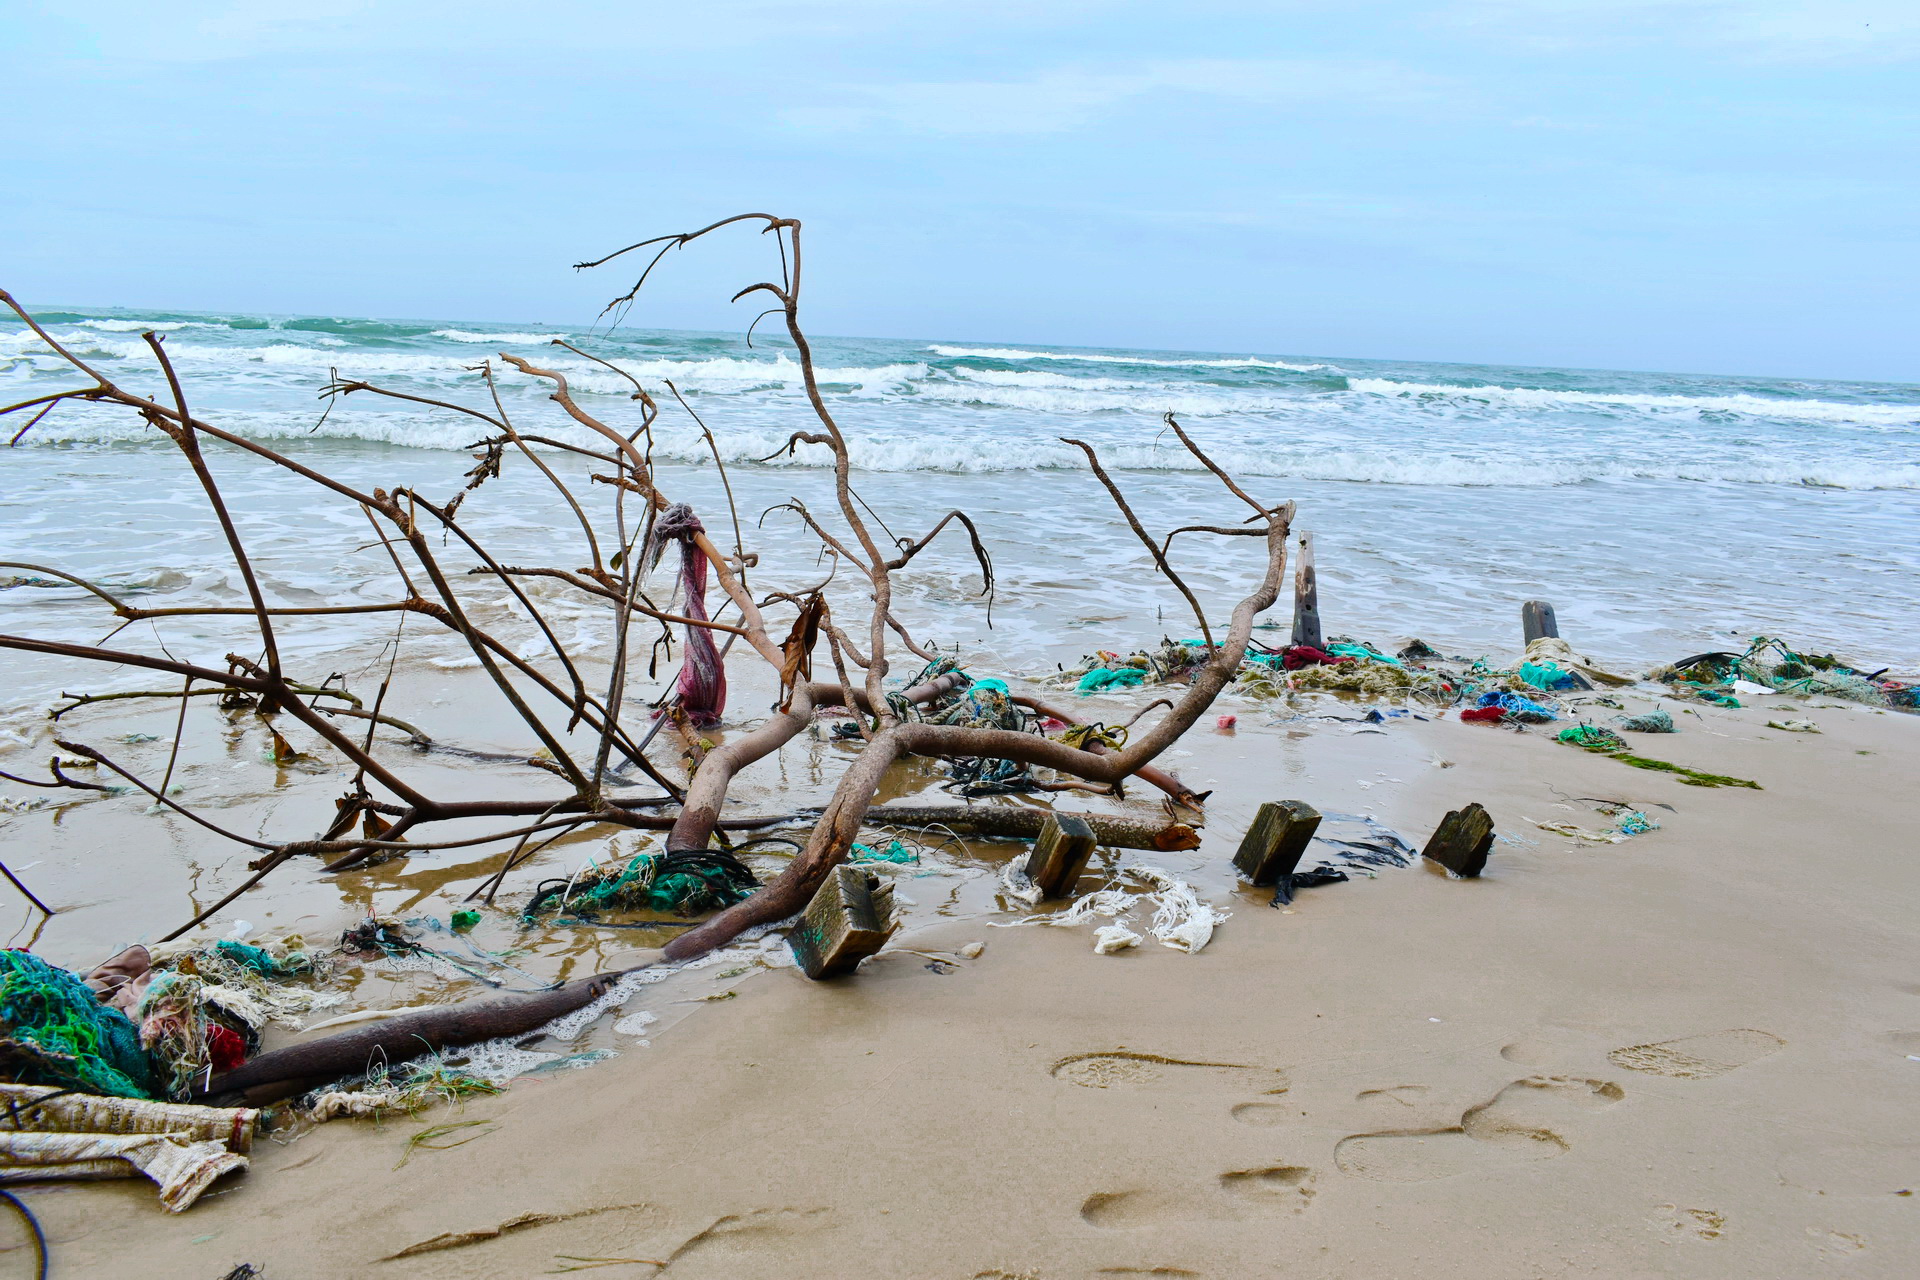 The Ke Ga Beach in Binh Thuan Province, Vietnam is littered with trash from human activities. Photo: Tuan Son / Tuoi Tre News